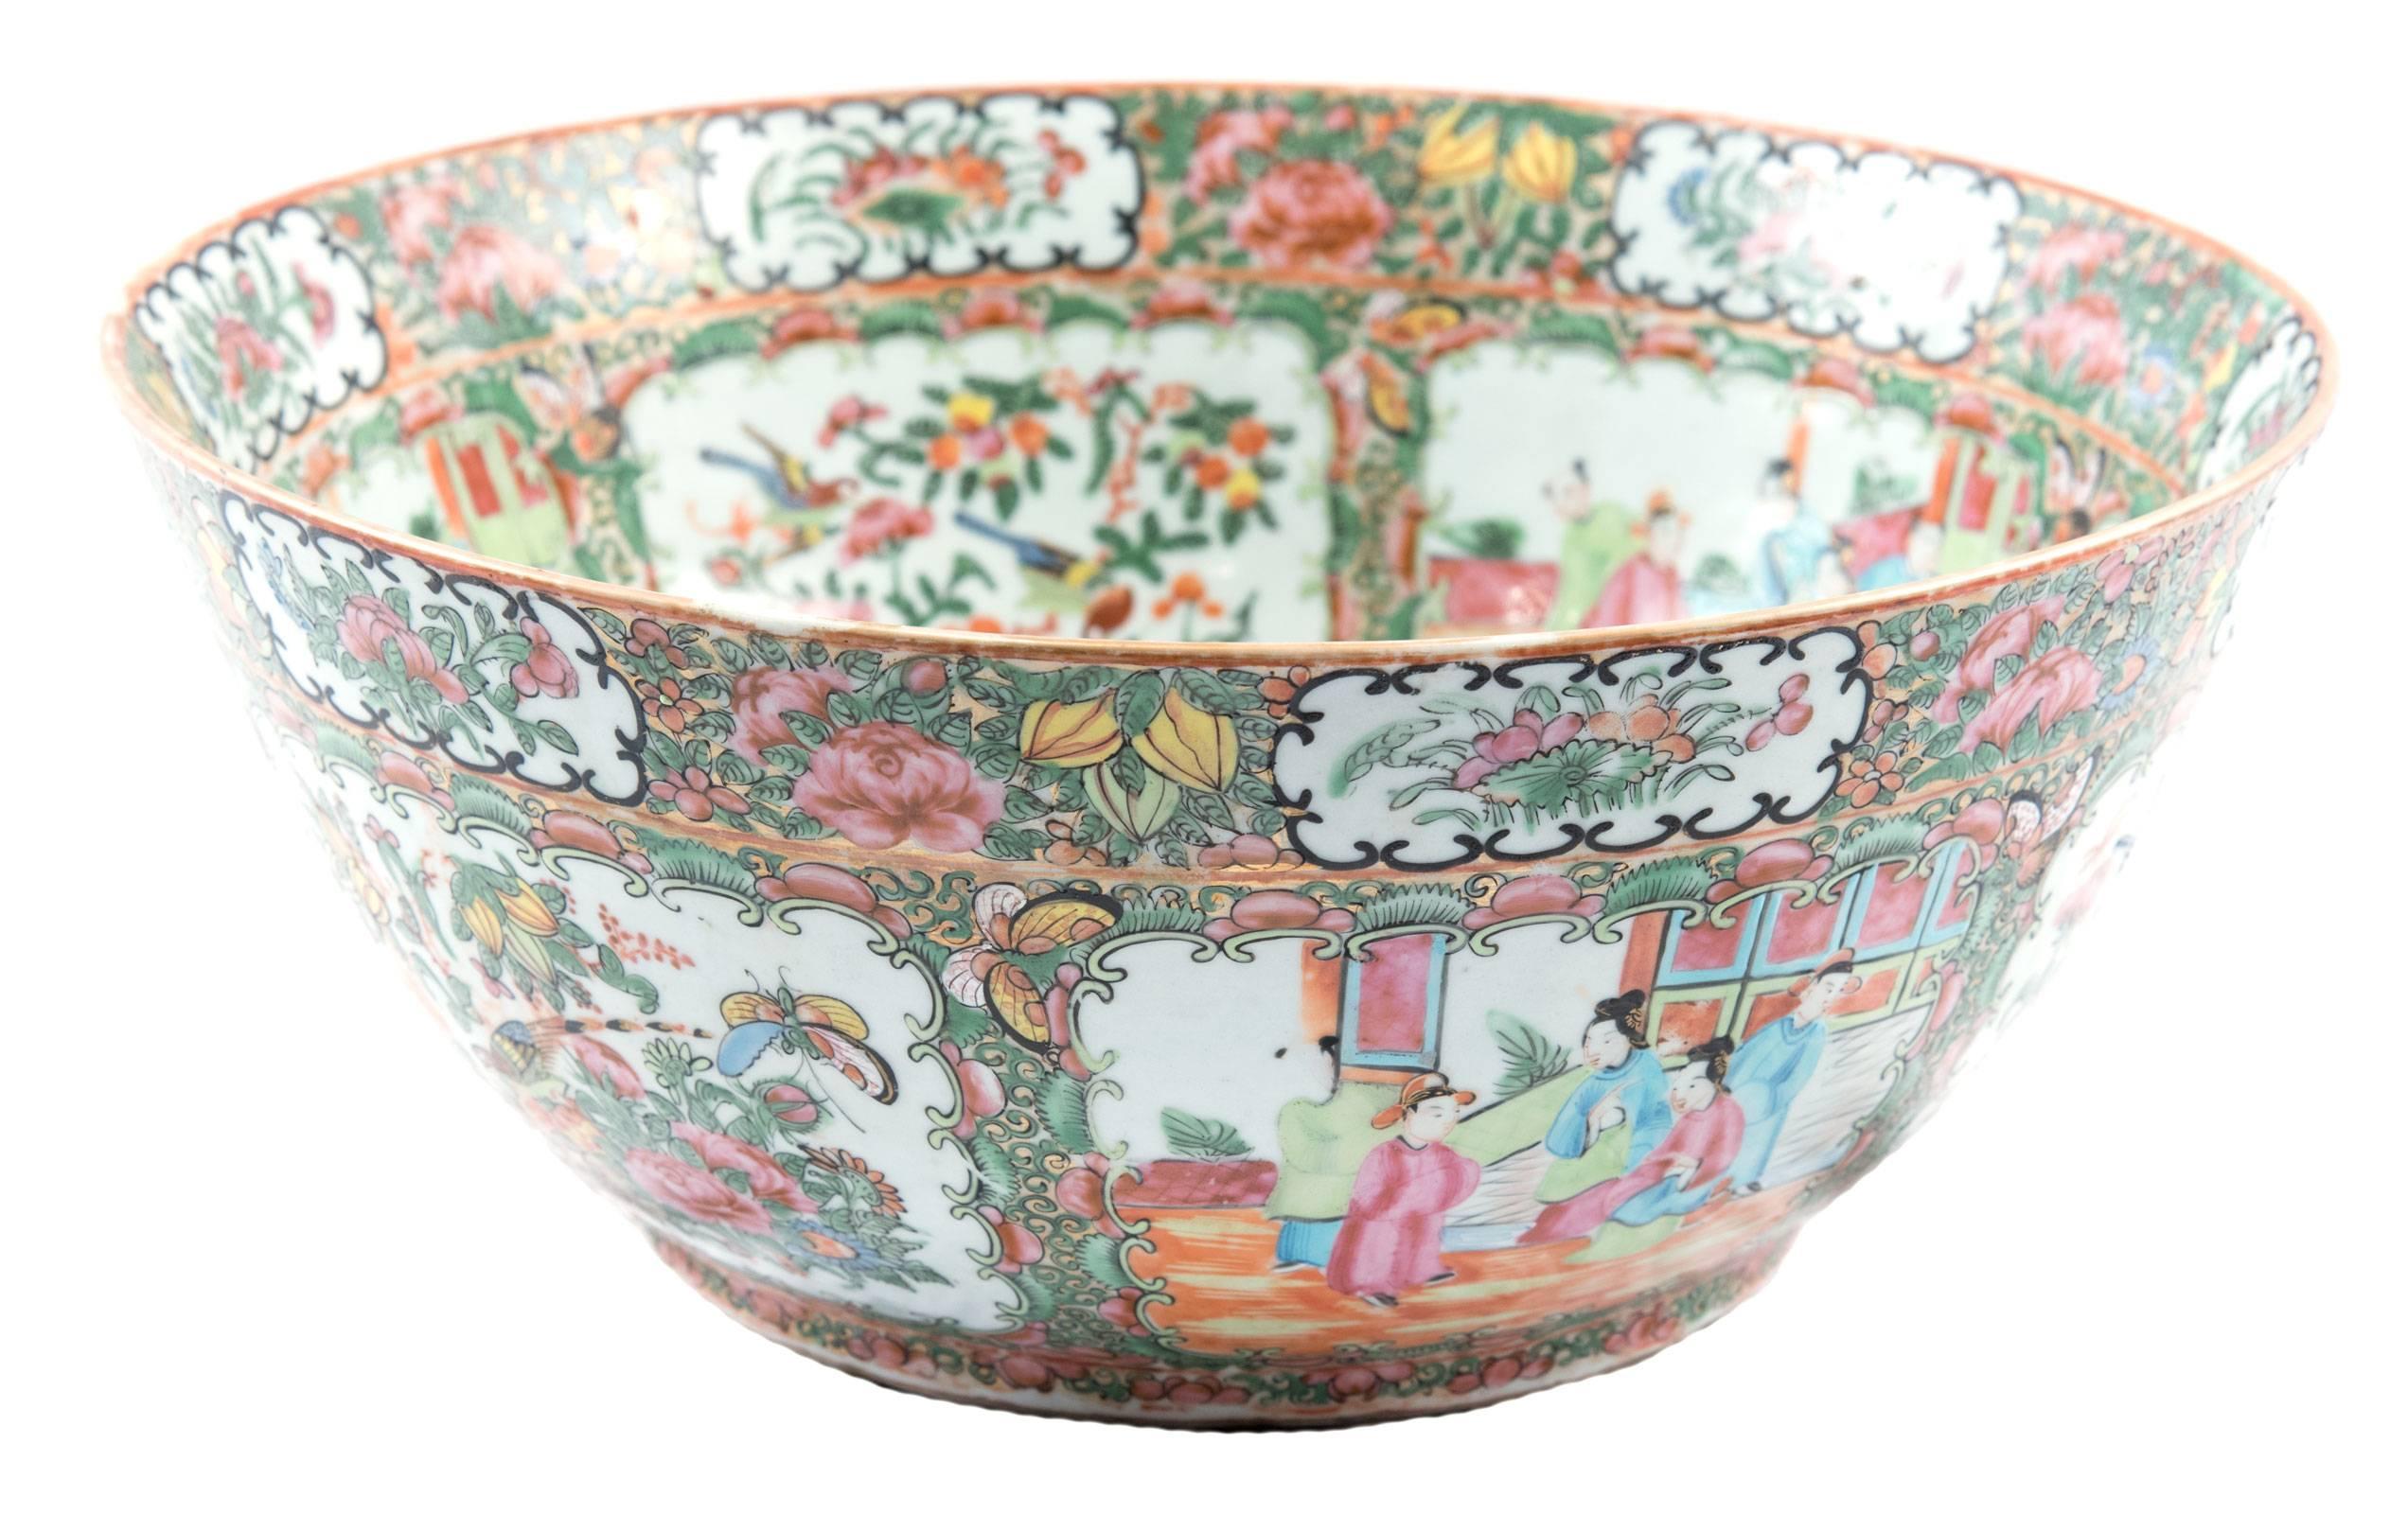 A finely decorated large famille rose medallion punch bowl with c-scroll cartouches containing alternating vignettes decorated with court scenes and bouquet of flowers with sacred bird patterns, on a field of vines populated by butterflies to a rim